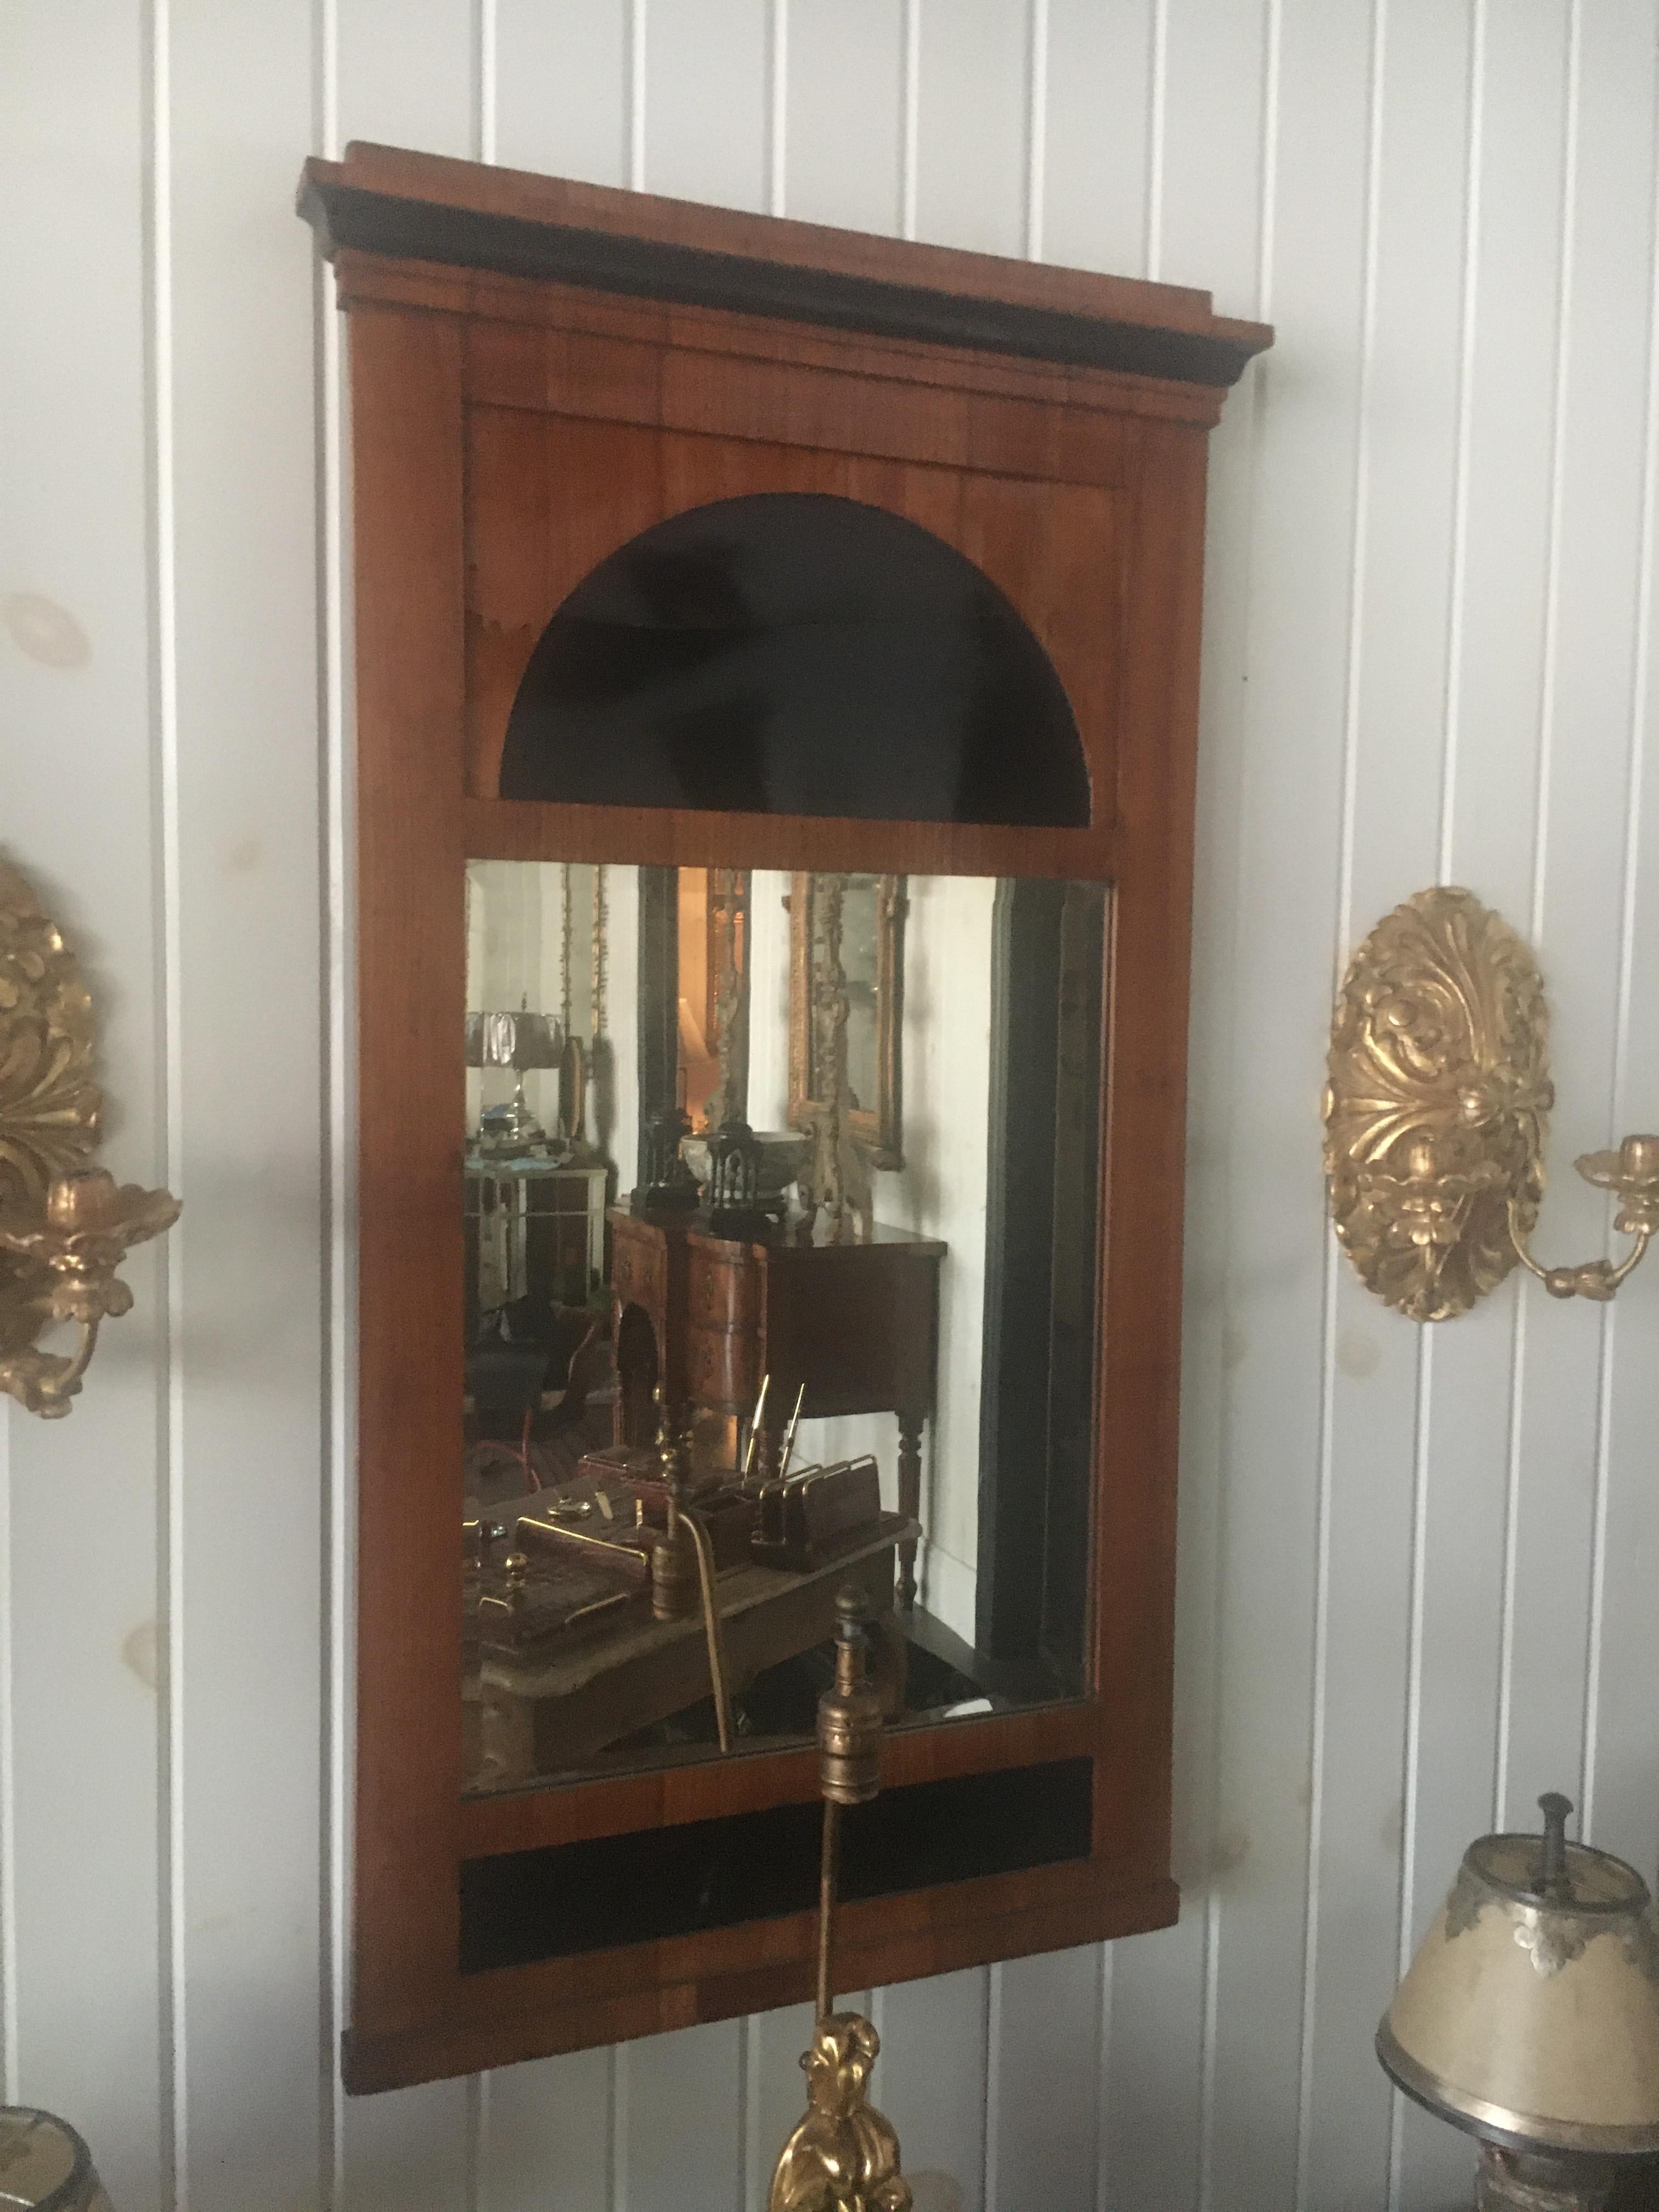 A Biedermeier fruitwood pier mirror 
19th century 
having a molded projecting cornice above a panel carved to show a demilune and a vertical rectangular beveled mirror plate. 
Measure: Height 41 x width 22 5/8 inches.